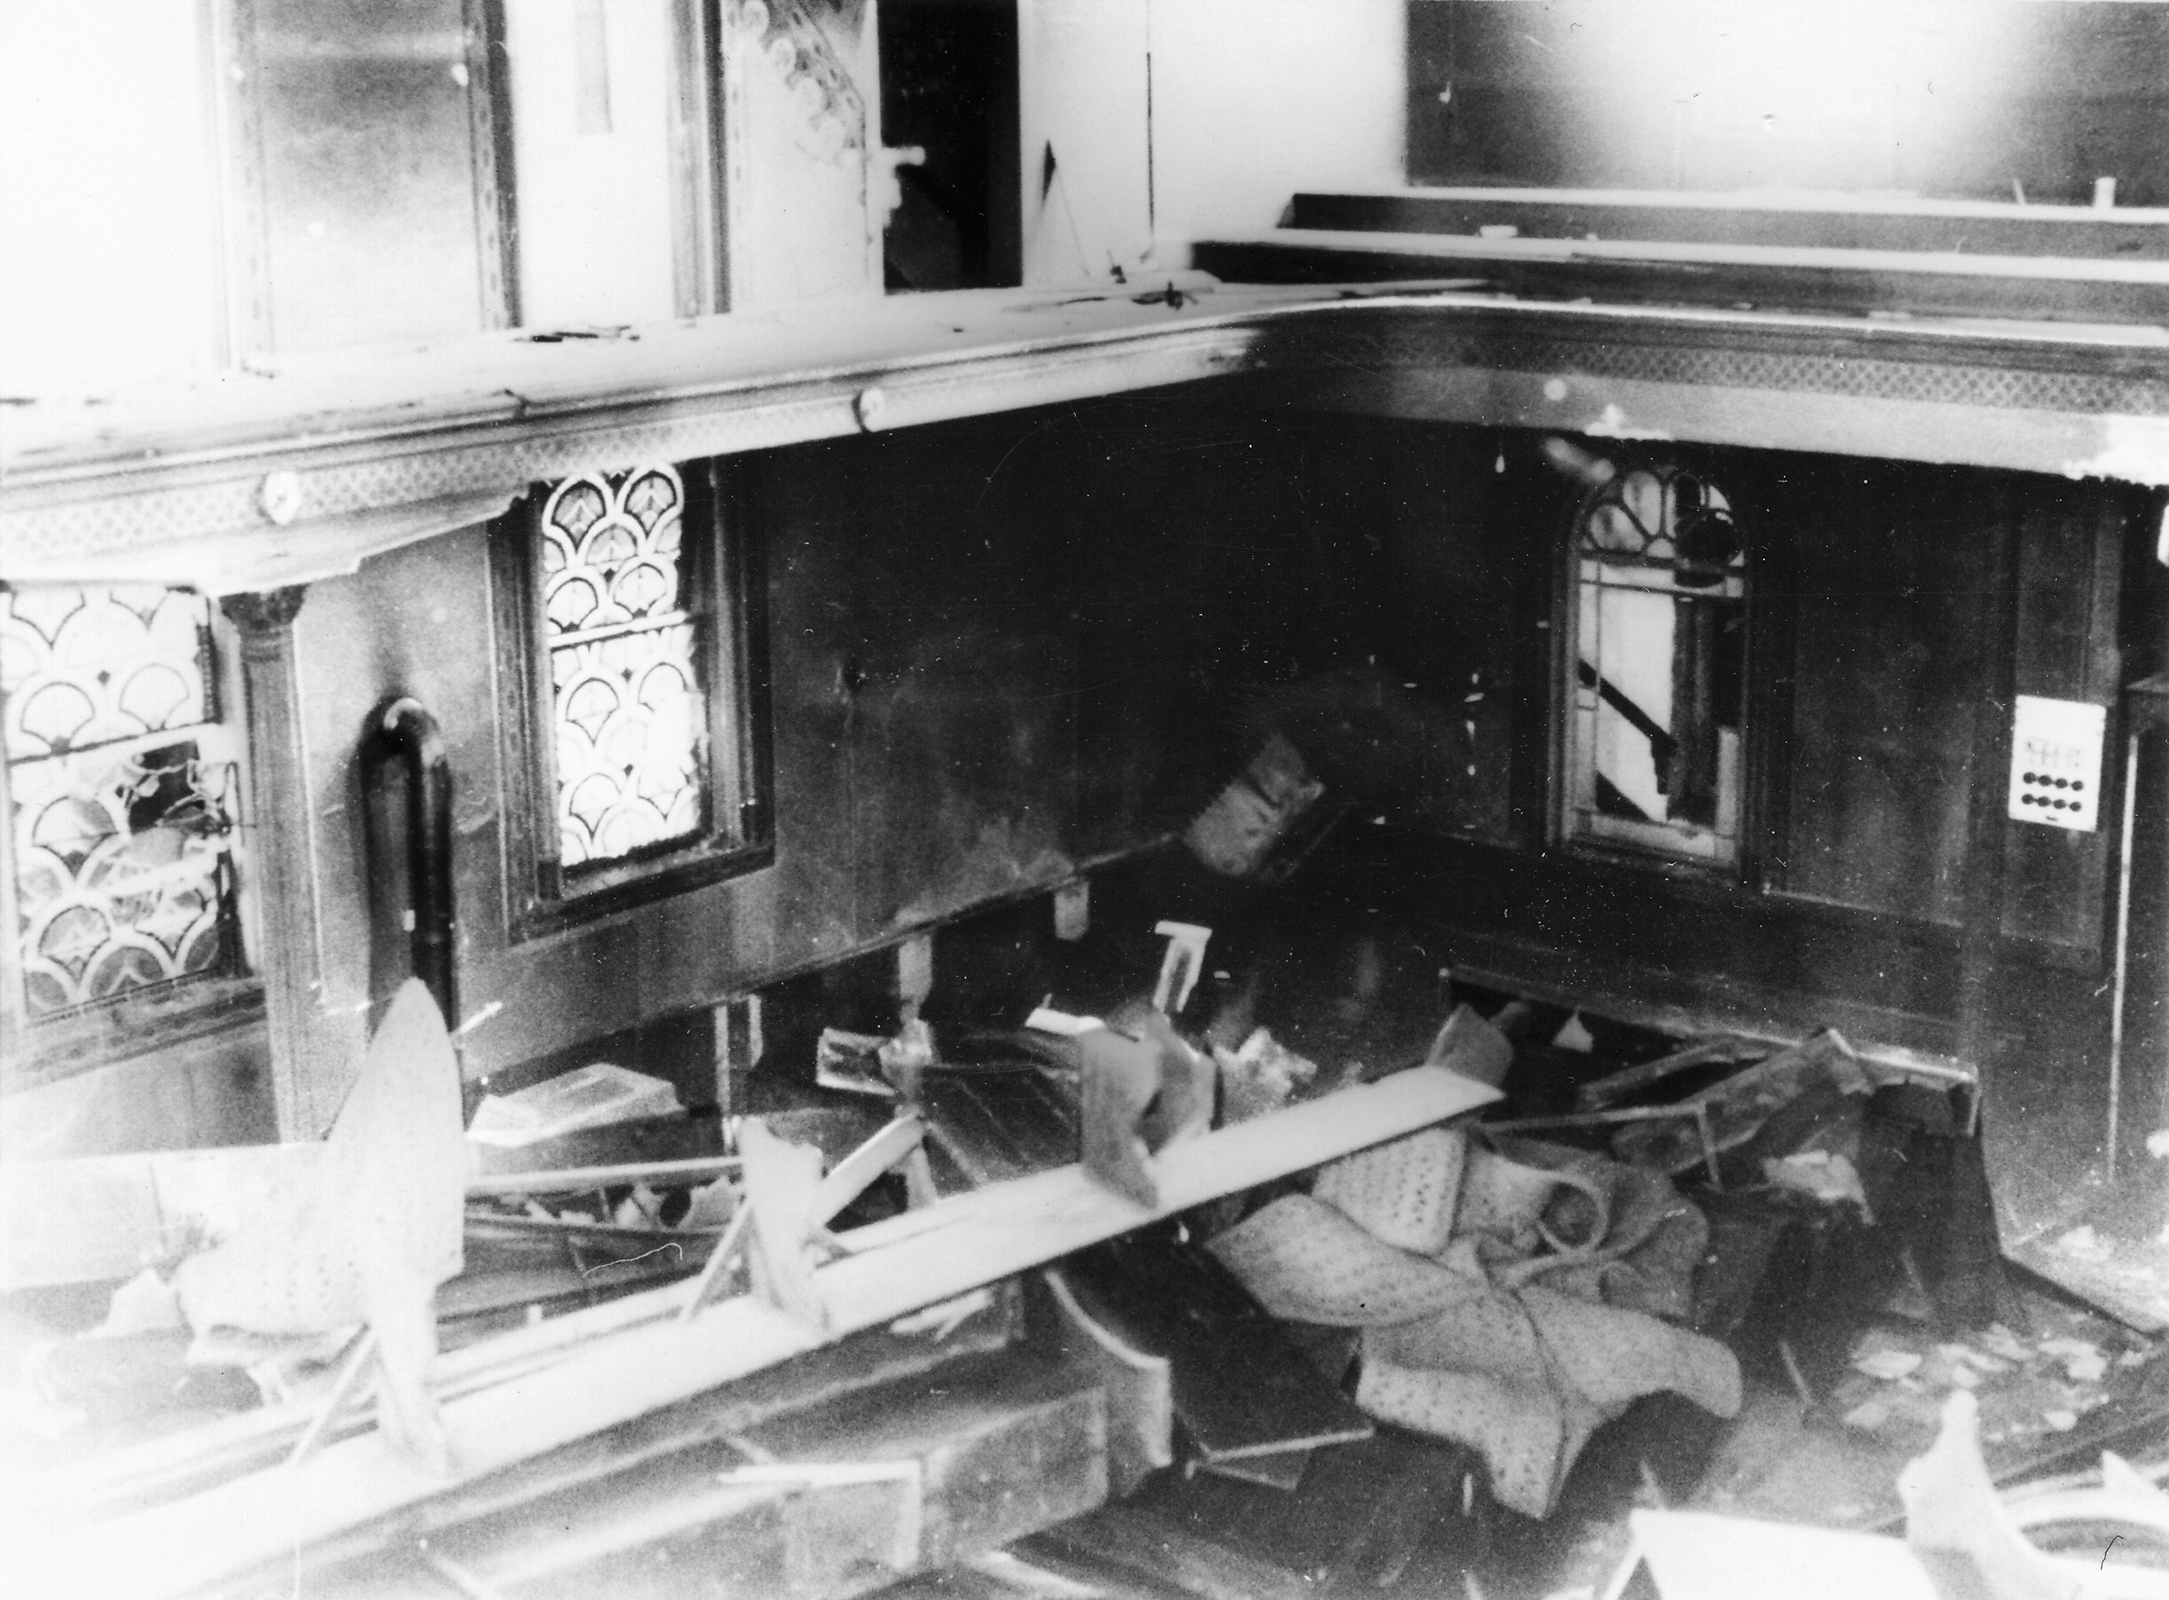 The synagogue in Hechingen destroyed inside